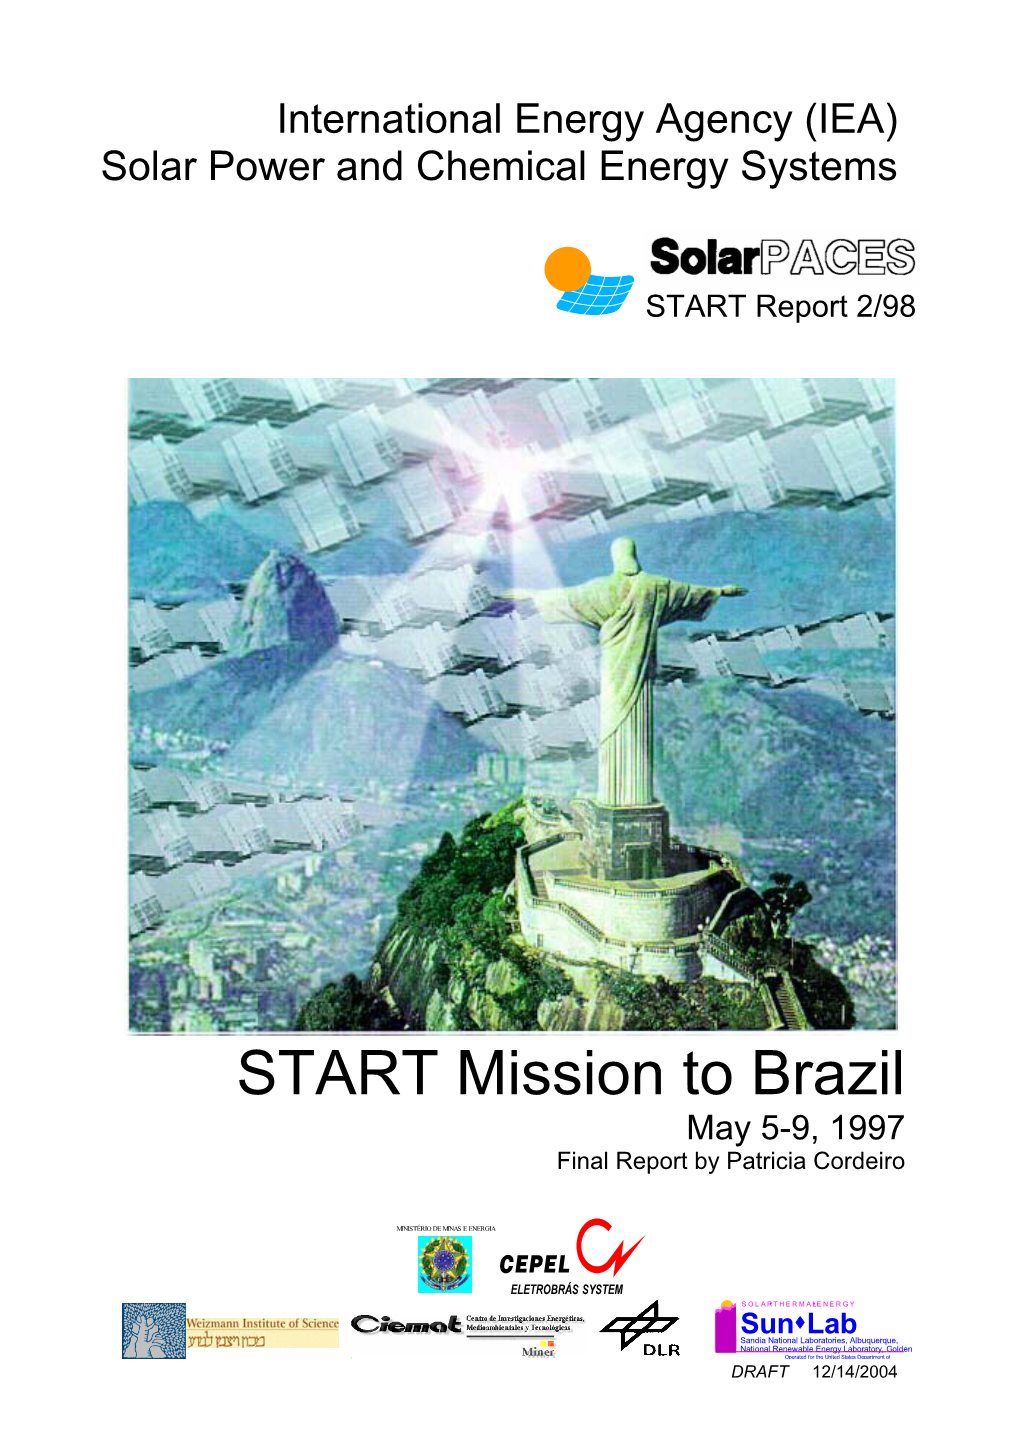 START Mission to Brazil May 5-9, 1997 Final Report by Patricia Cordeiro